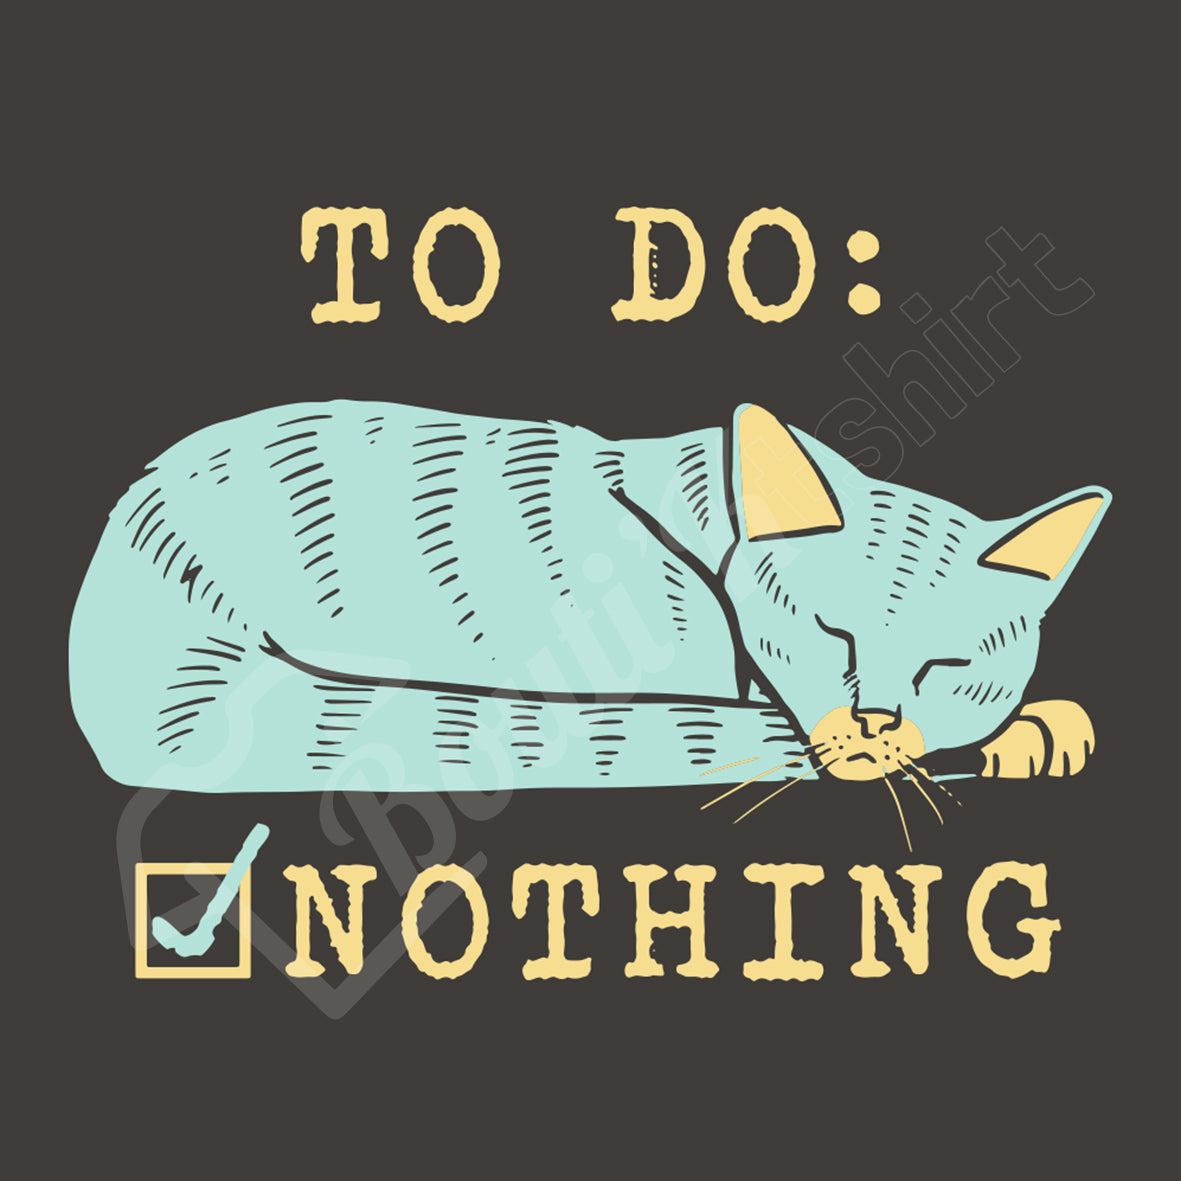 Tshirt TO-DO : Nothing